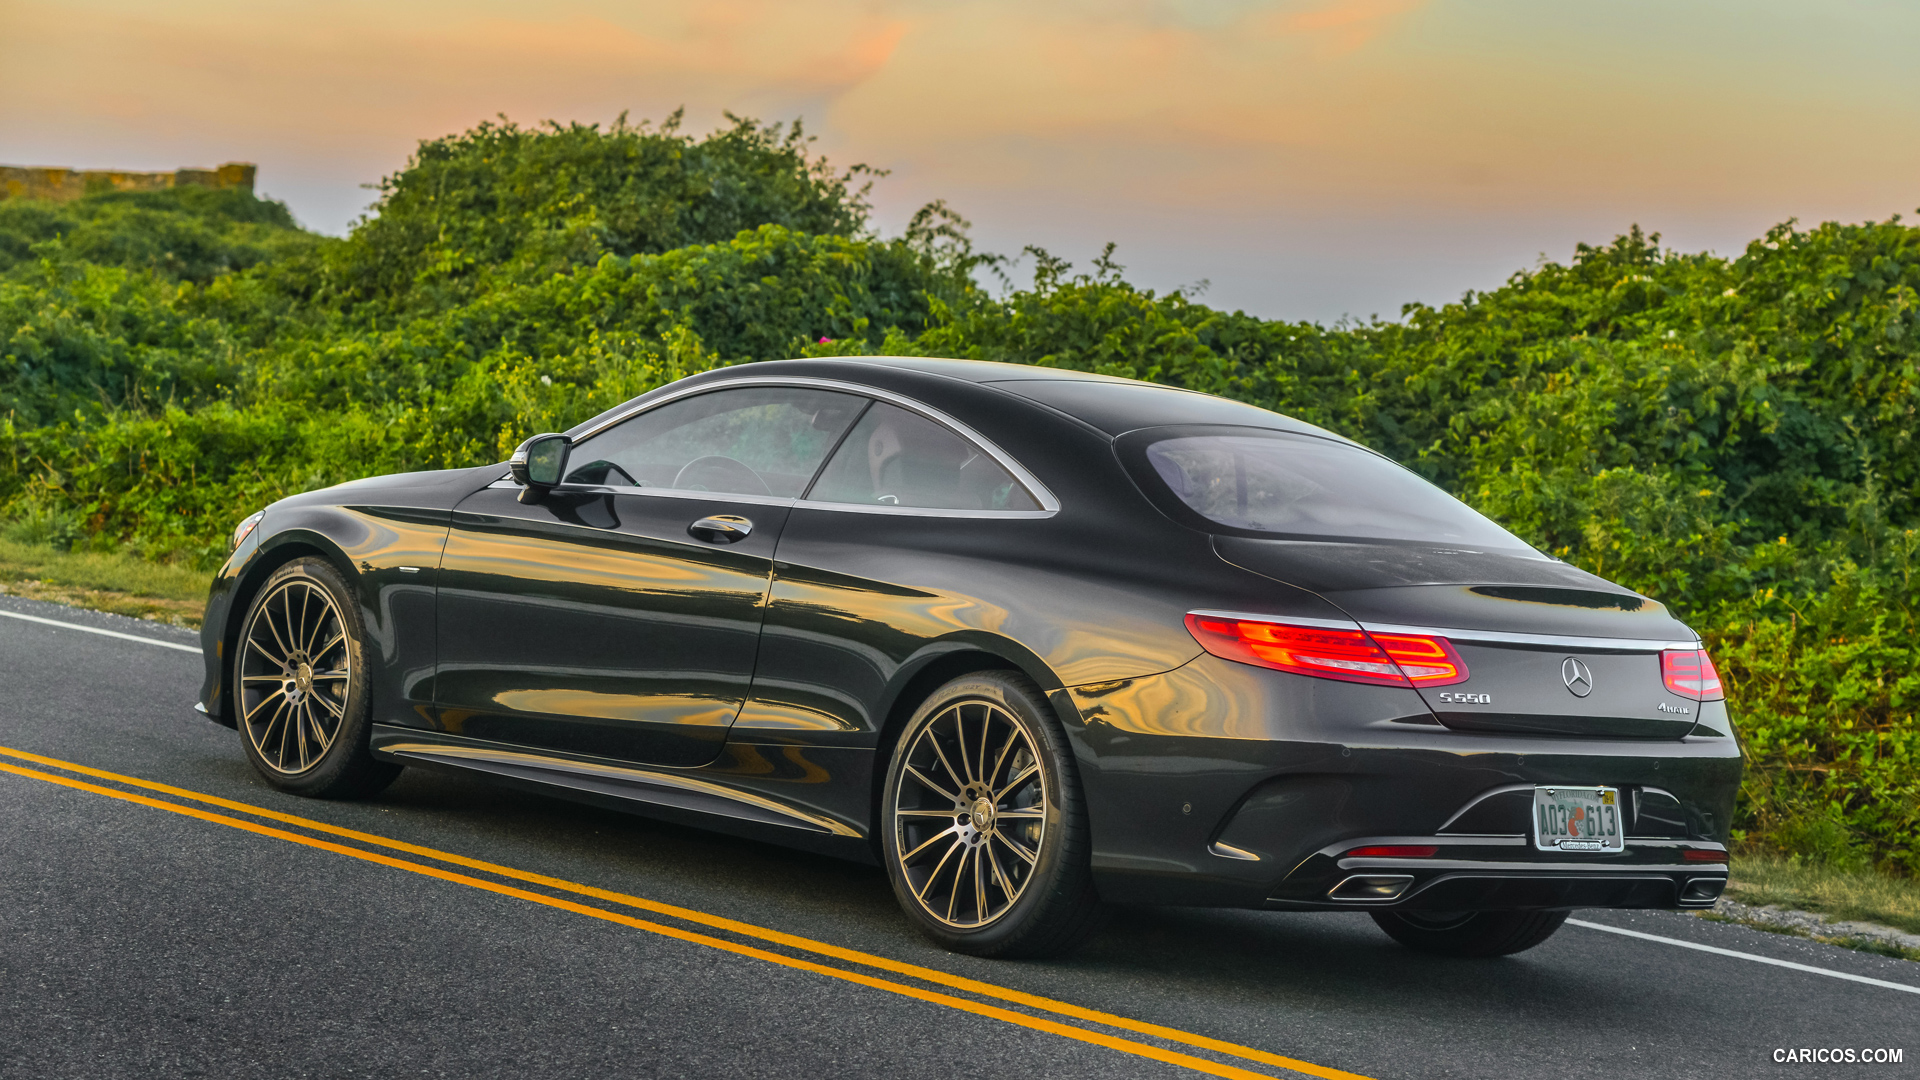 2015 Mercedes-Benz S550 4MATIC Coupe  - Rear, #20 of 60